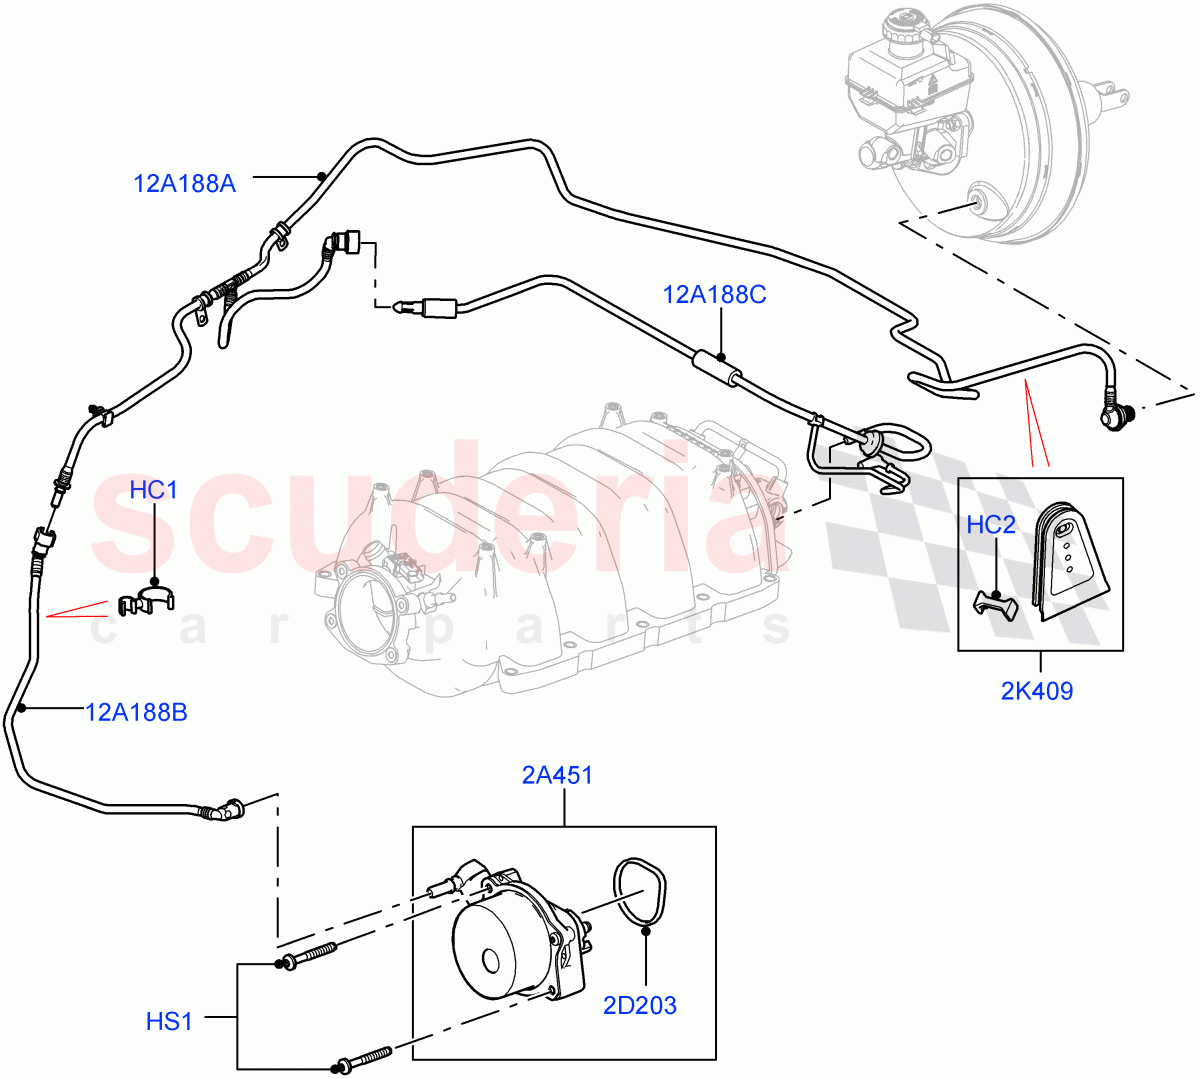 Vacuum Control And Air Injection(5.0L OHC SGDI NA V8 Petrol - AJ133)((V)FROMAA000001) of Land Rover Land Rover Range Rover (2010-2012) [5.0 OHC SGDI NA V8 Petrol]